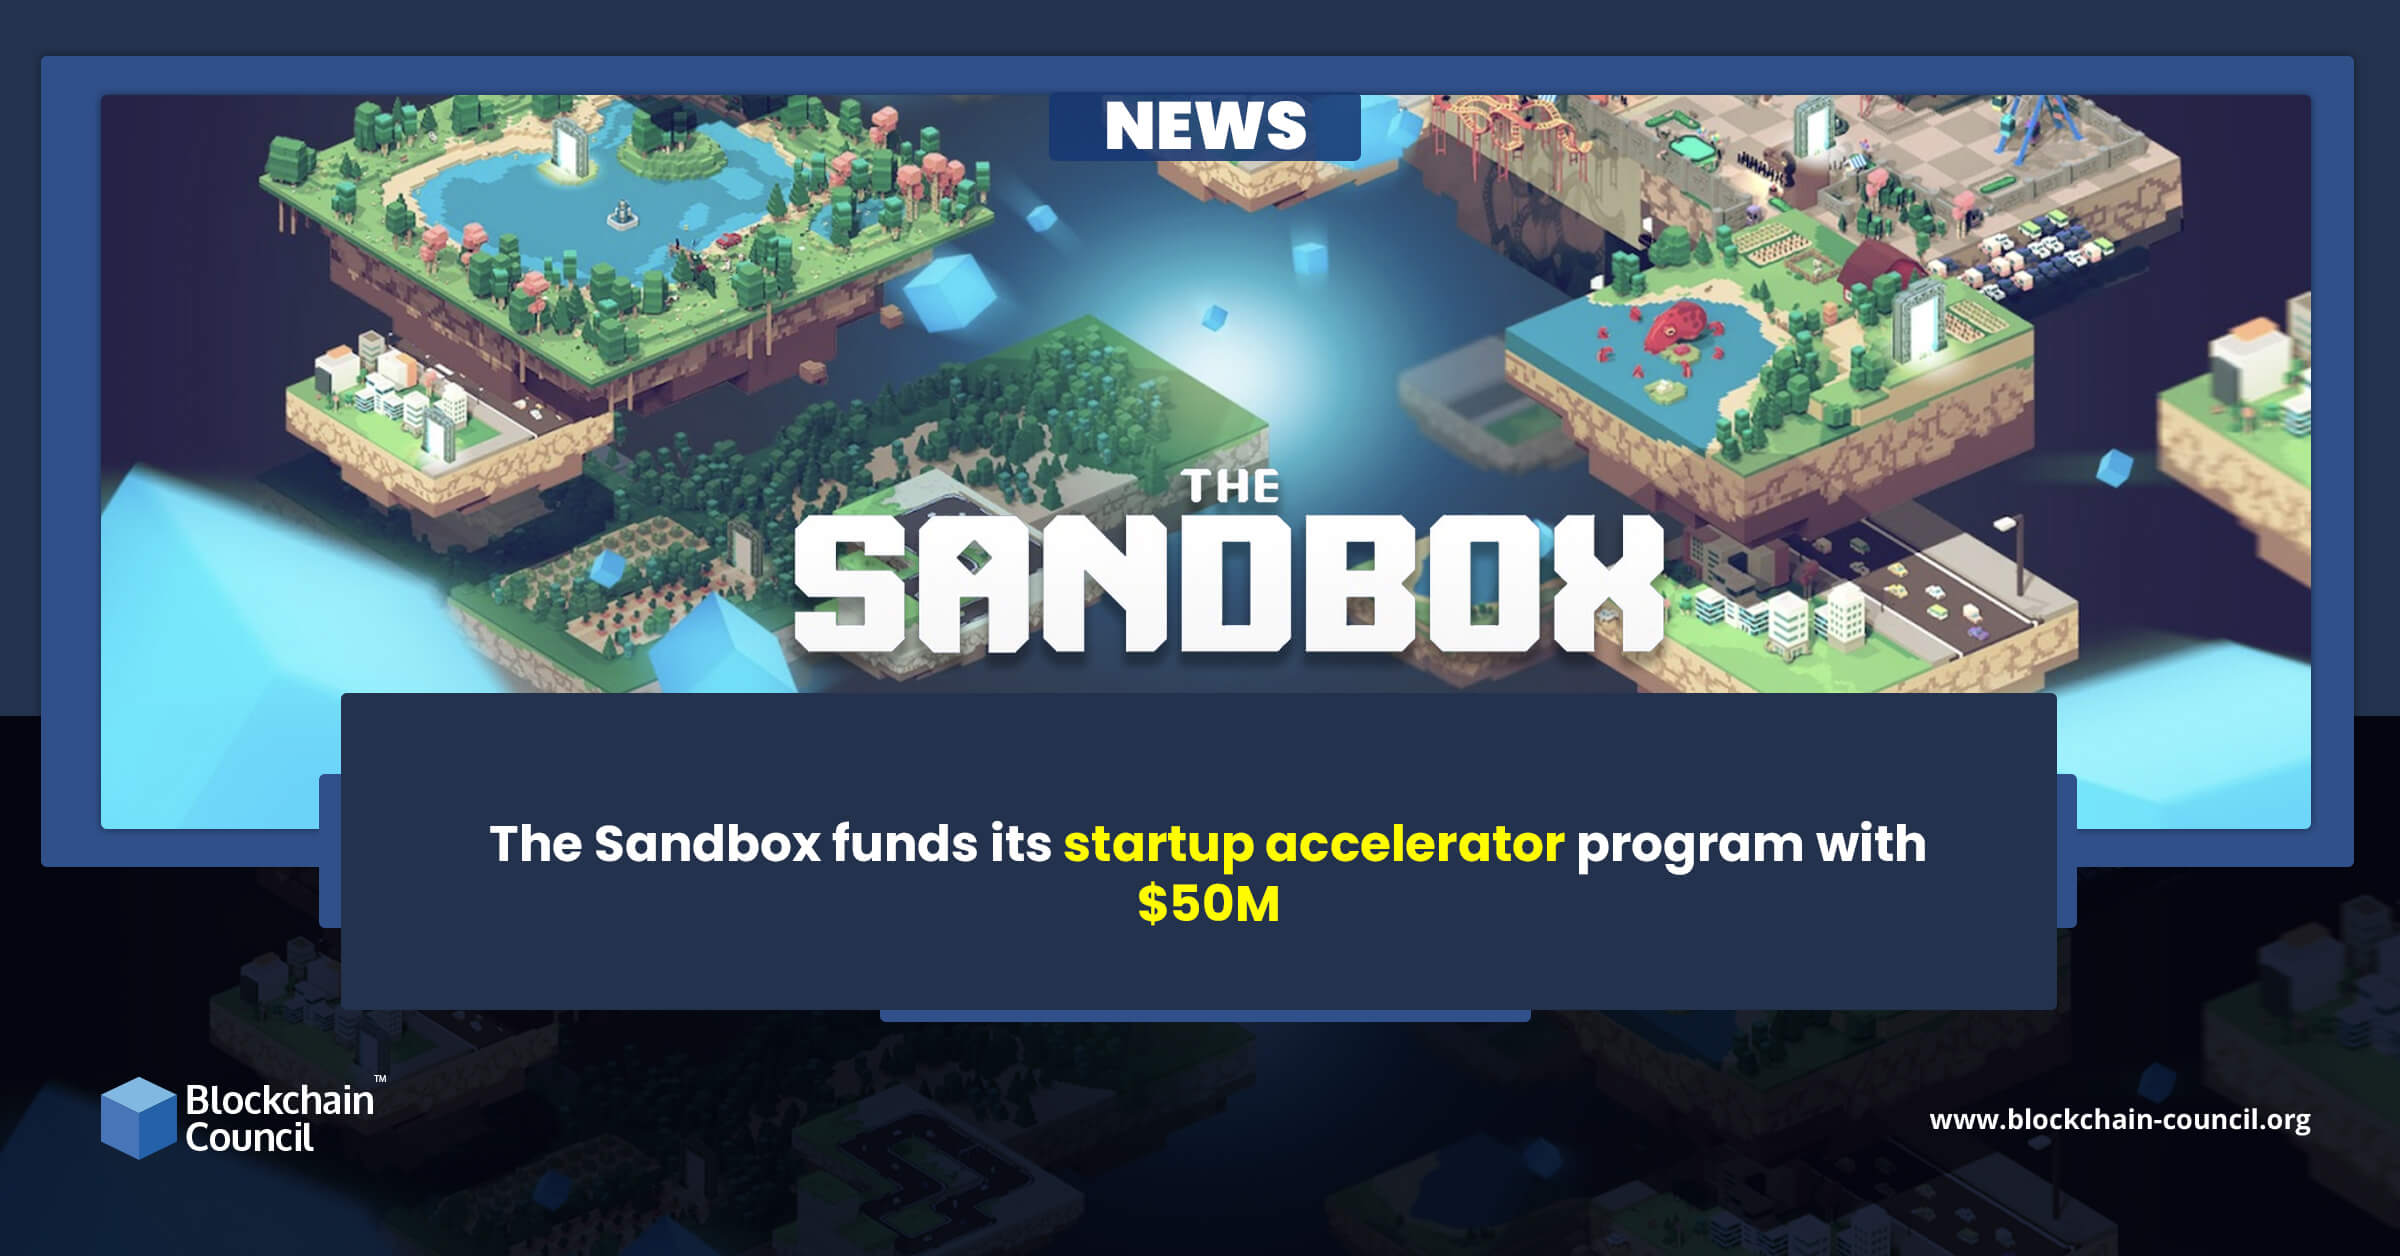 The Sandbox funds its startup accelerator program with $50M